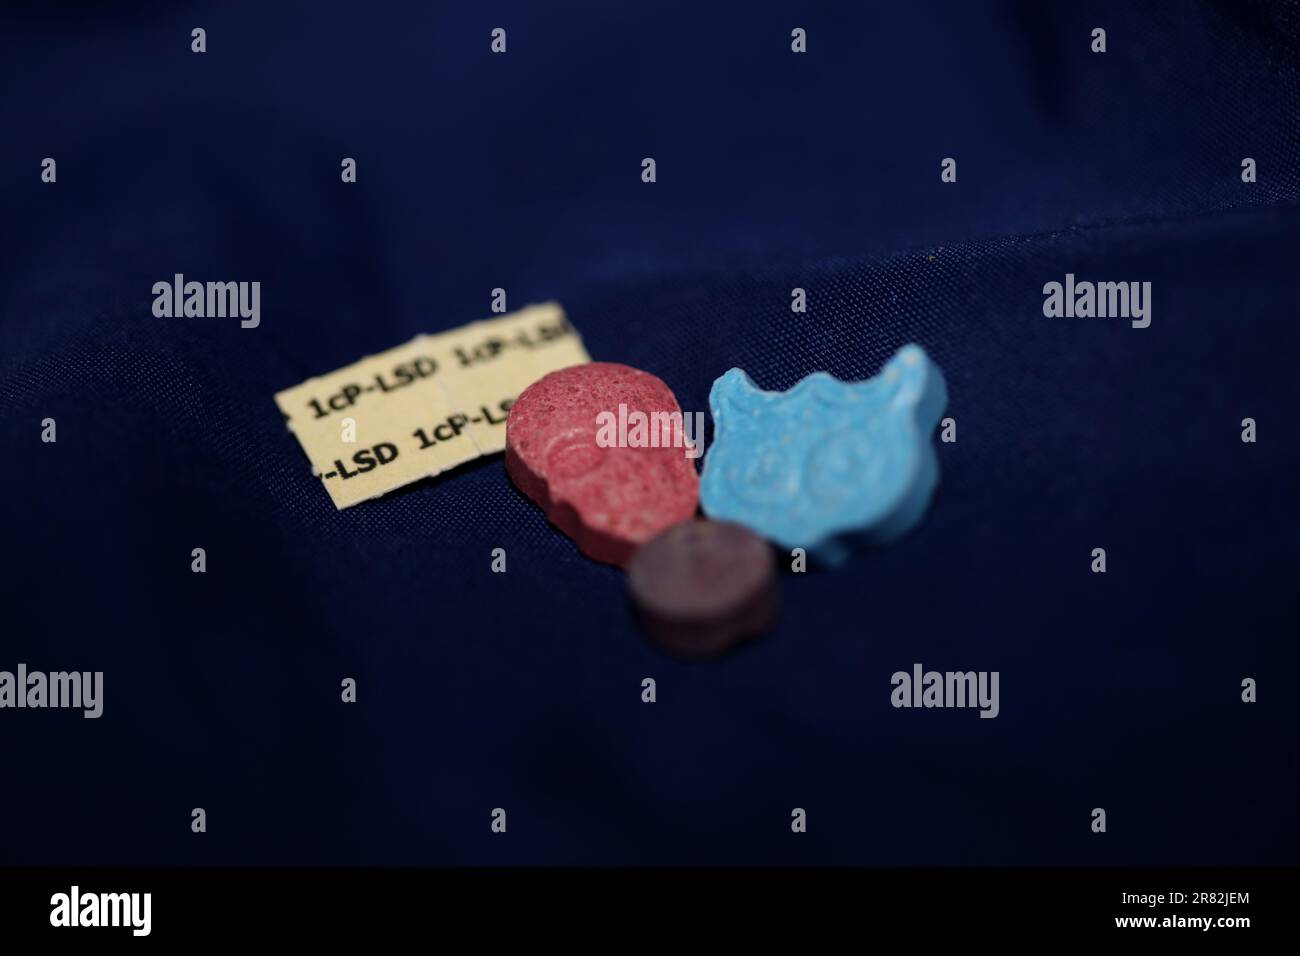 A mixed set of drugs and medicines pills containing mdma and lsd stick papers close up party animal backgrounds super high big size dance prints Stock Photo